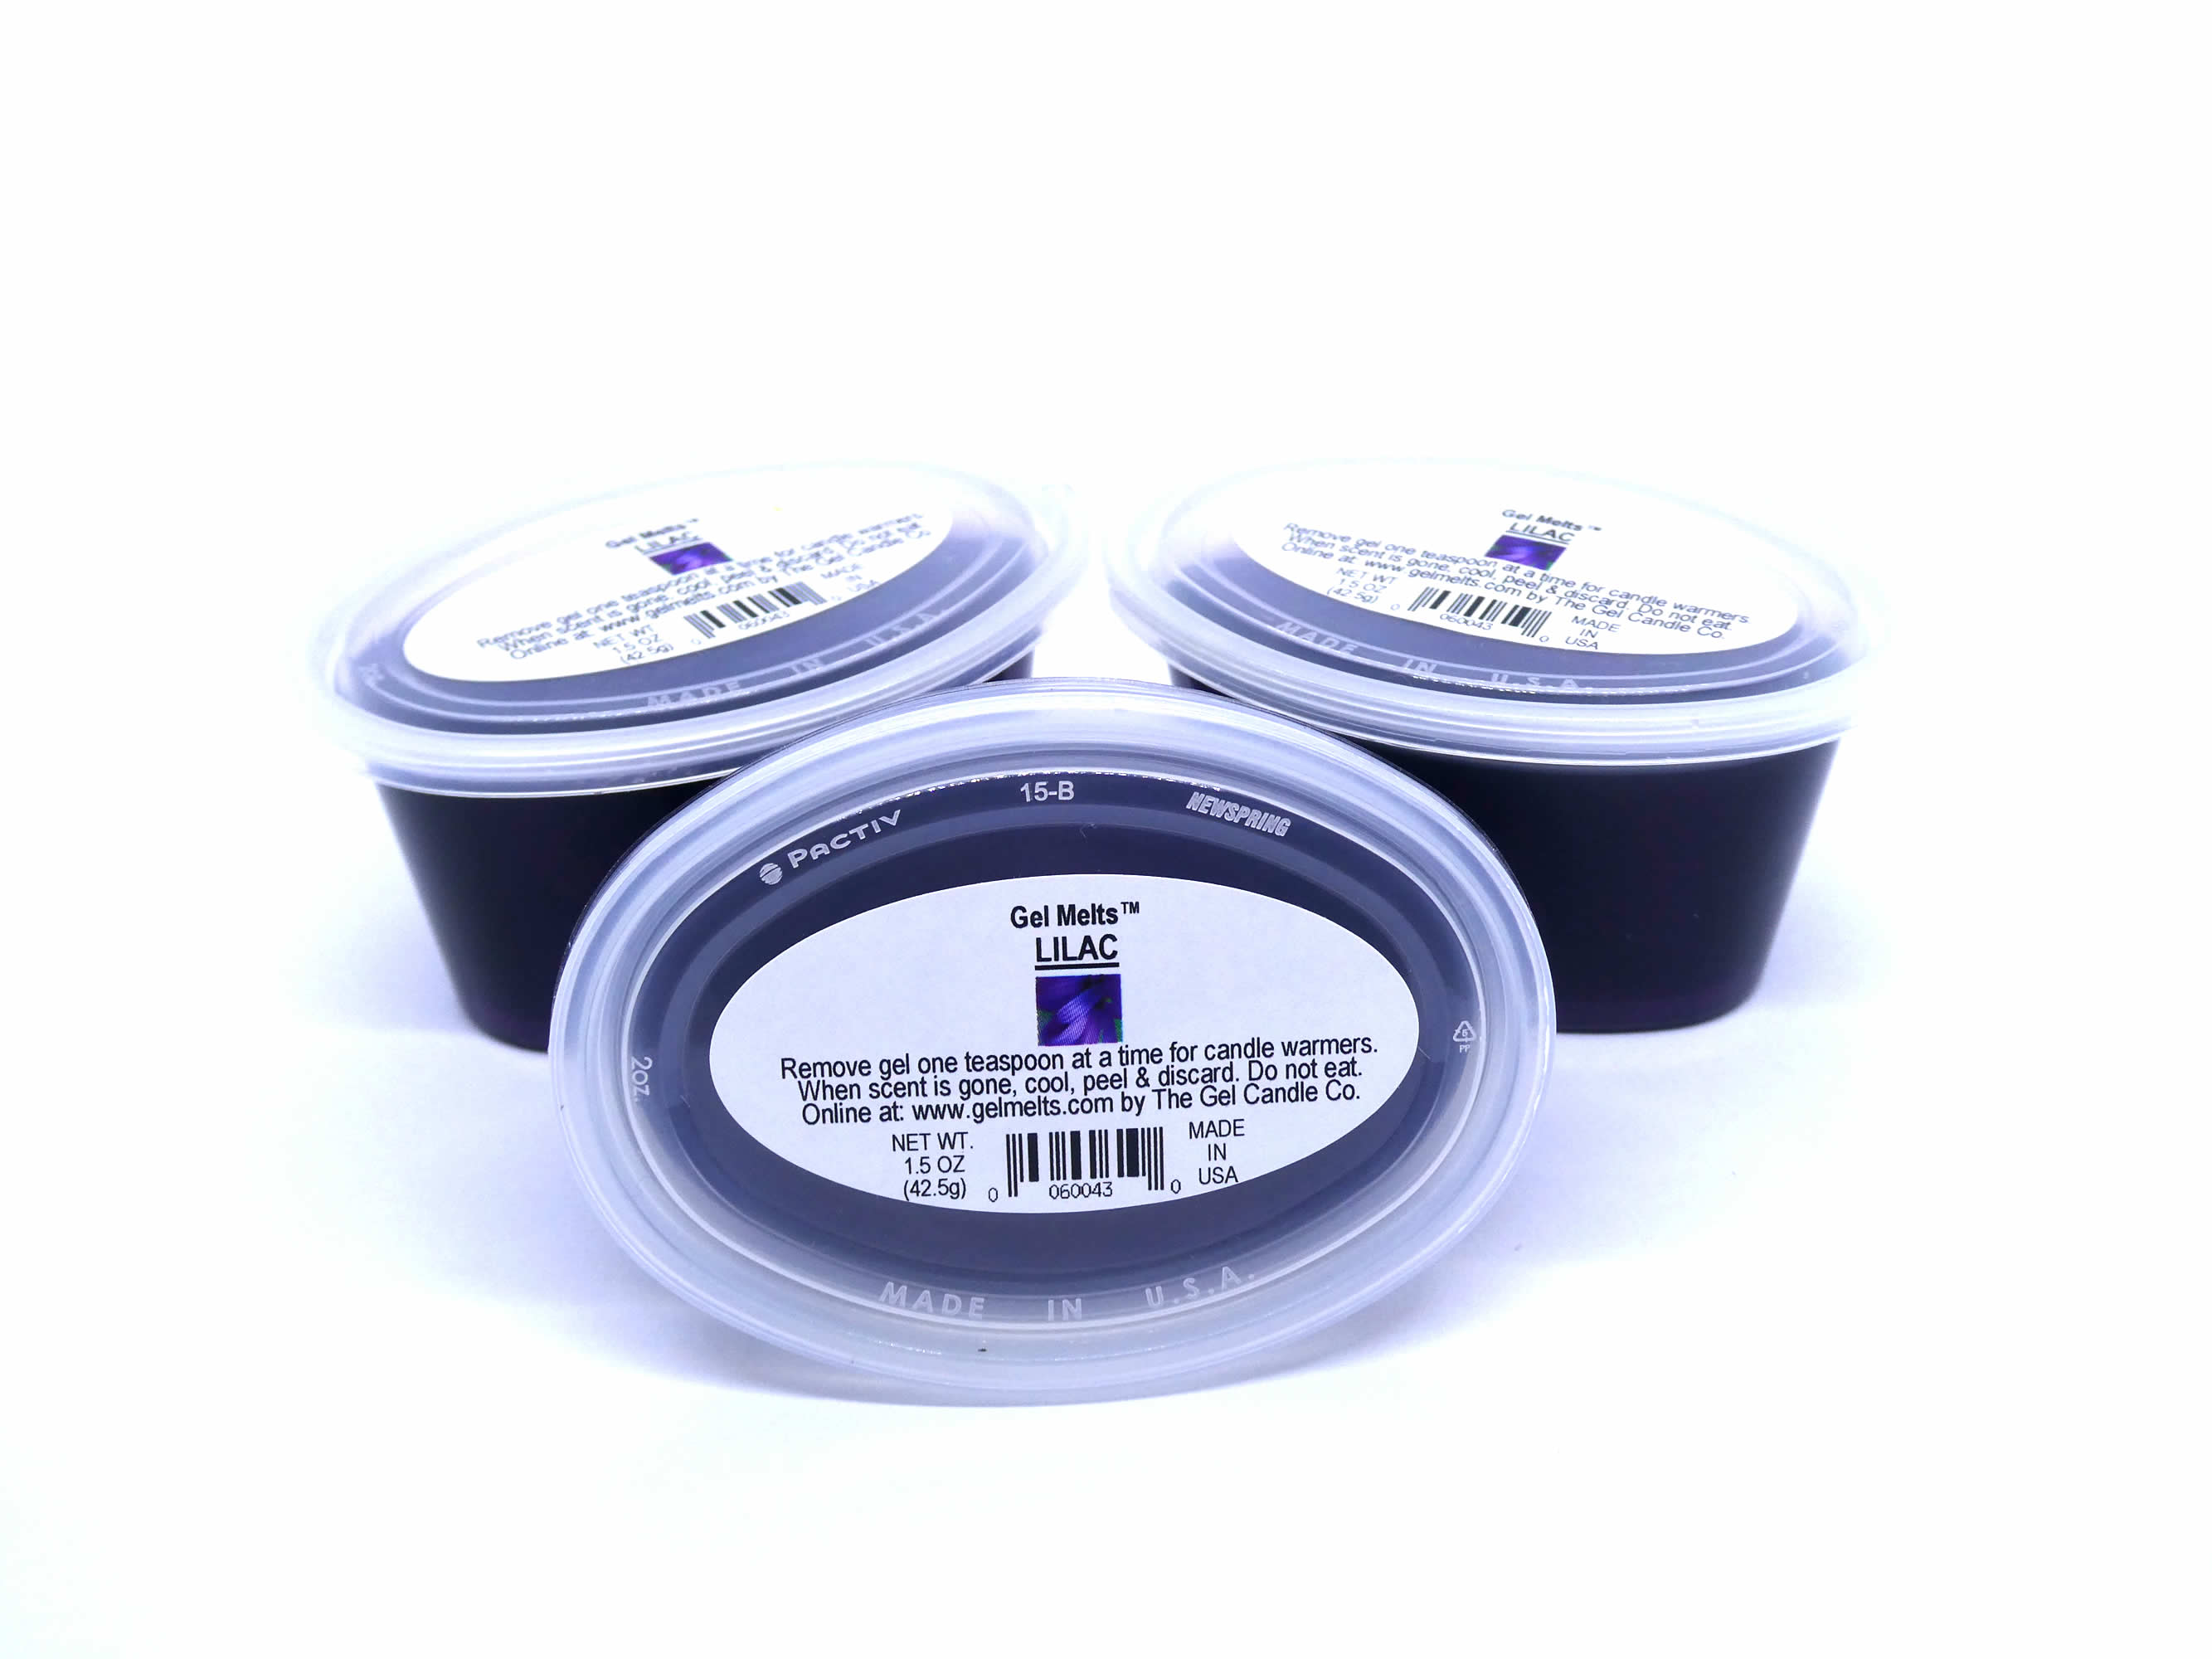 Lilac scented Gel Melts™ Gel Wax for warmers - 3 pack